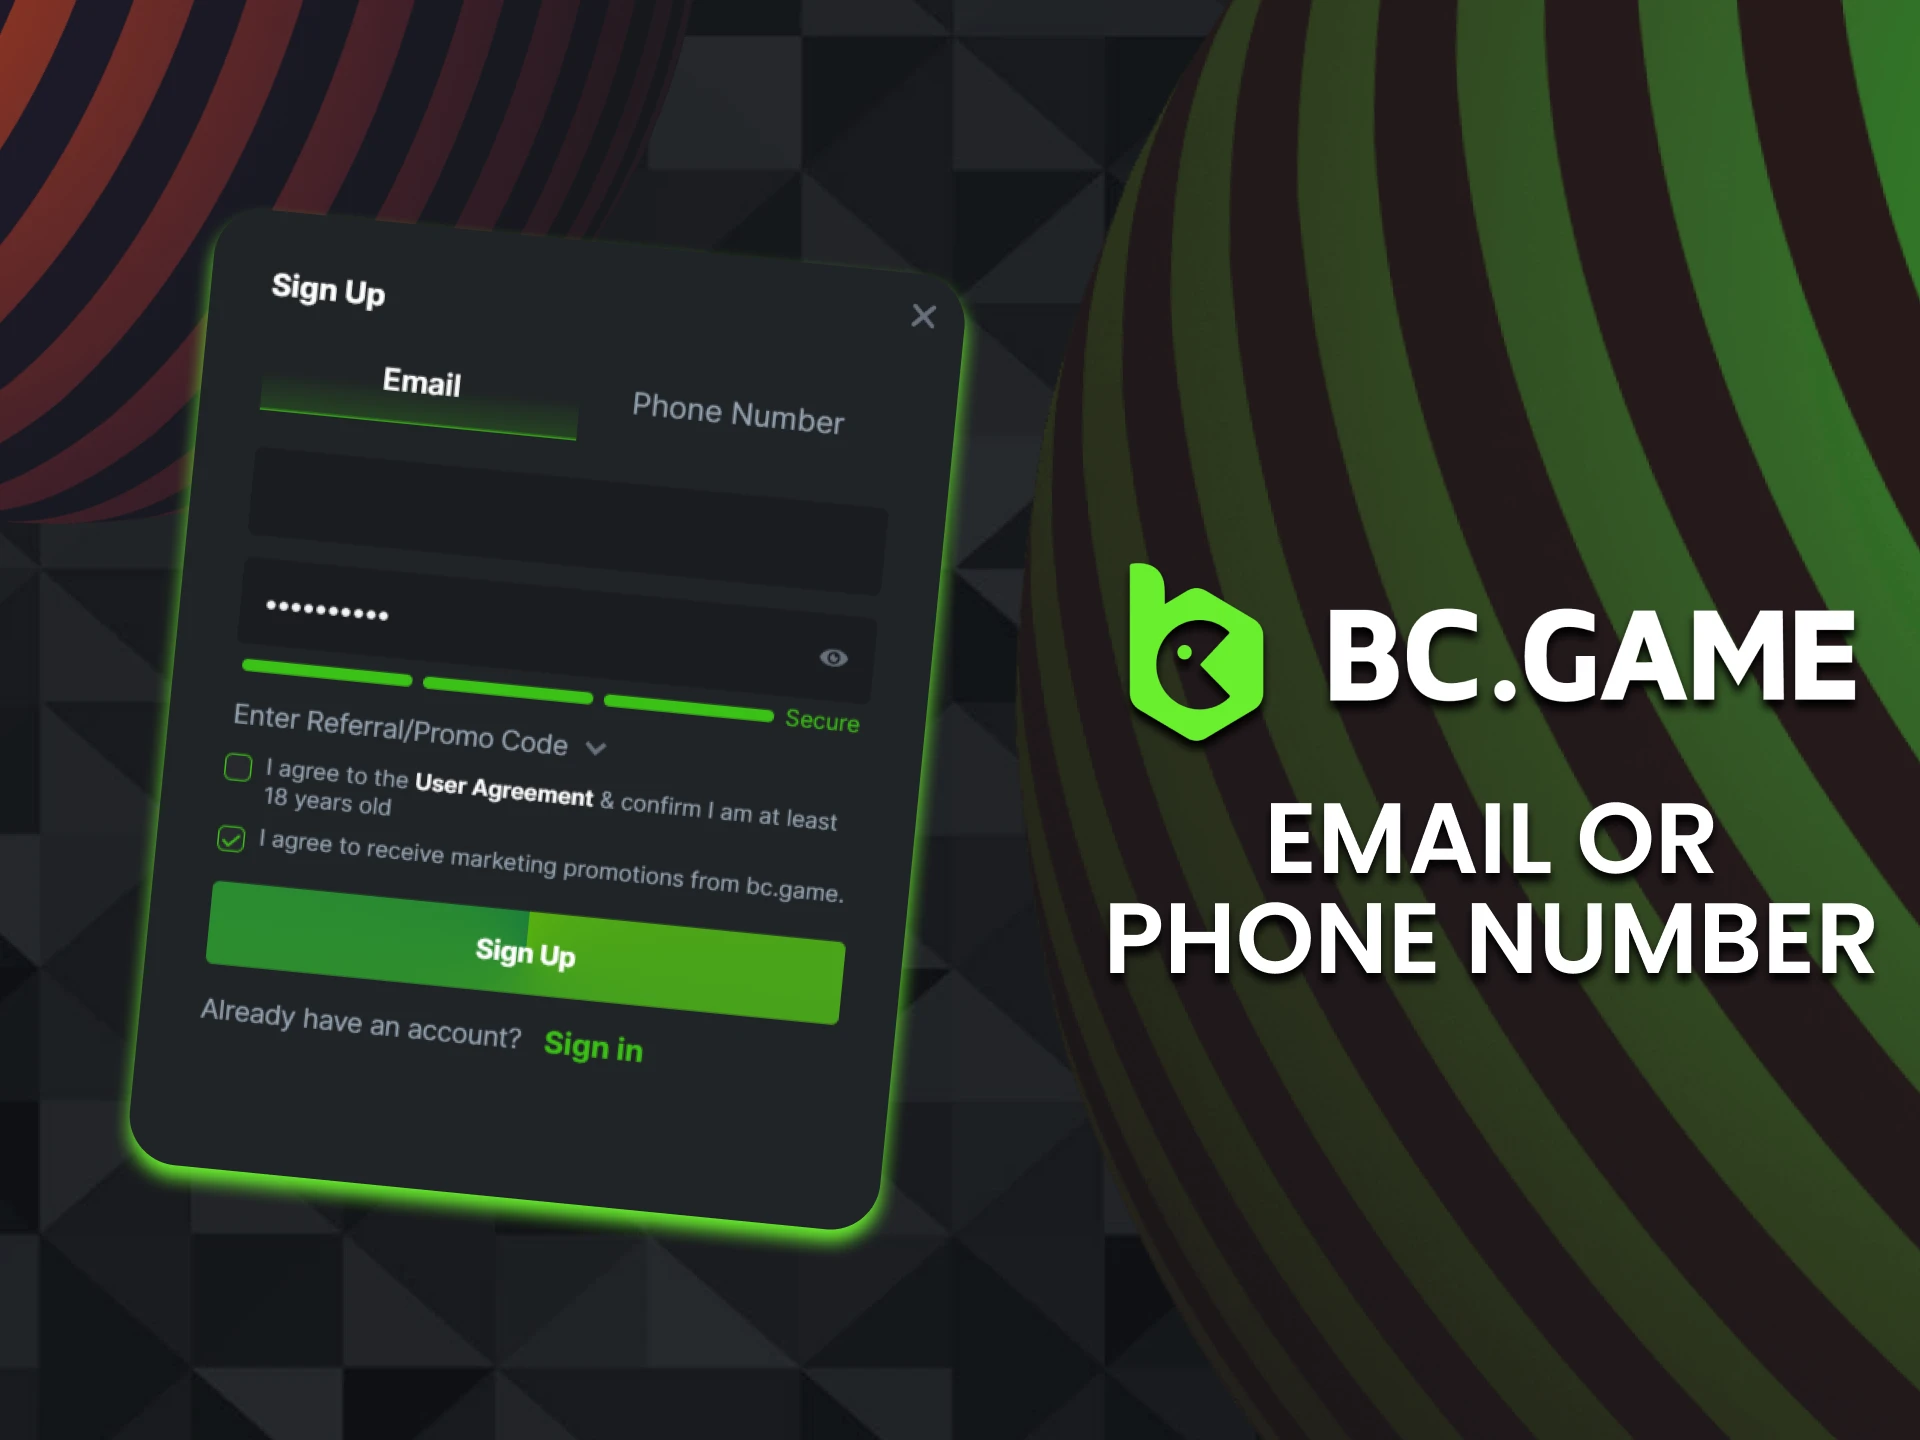 You can log into your BC Game account via email or phone number.